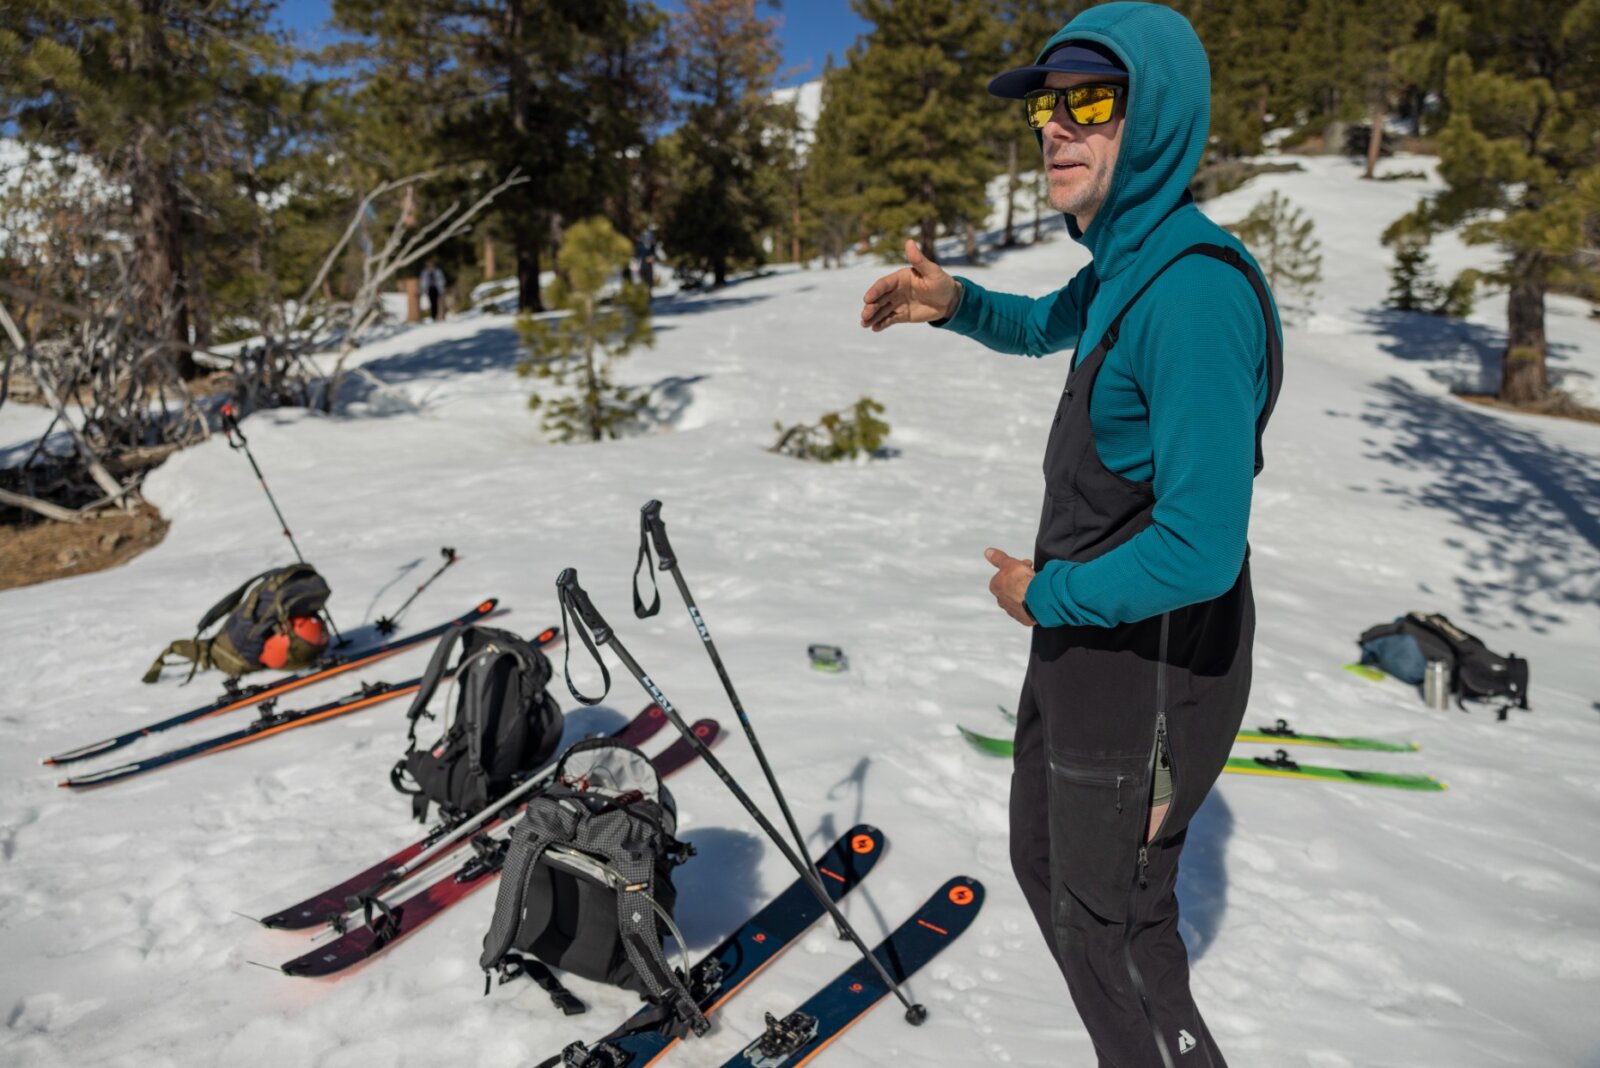 Guide explains backcountry touring principles during an Intro to Backcountry Skiing and Splitboarding course in Lake Tahoe with professional ski guides.